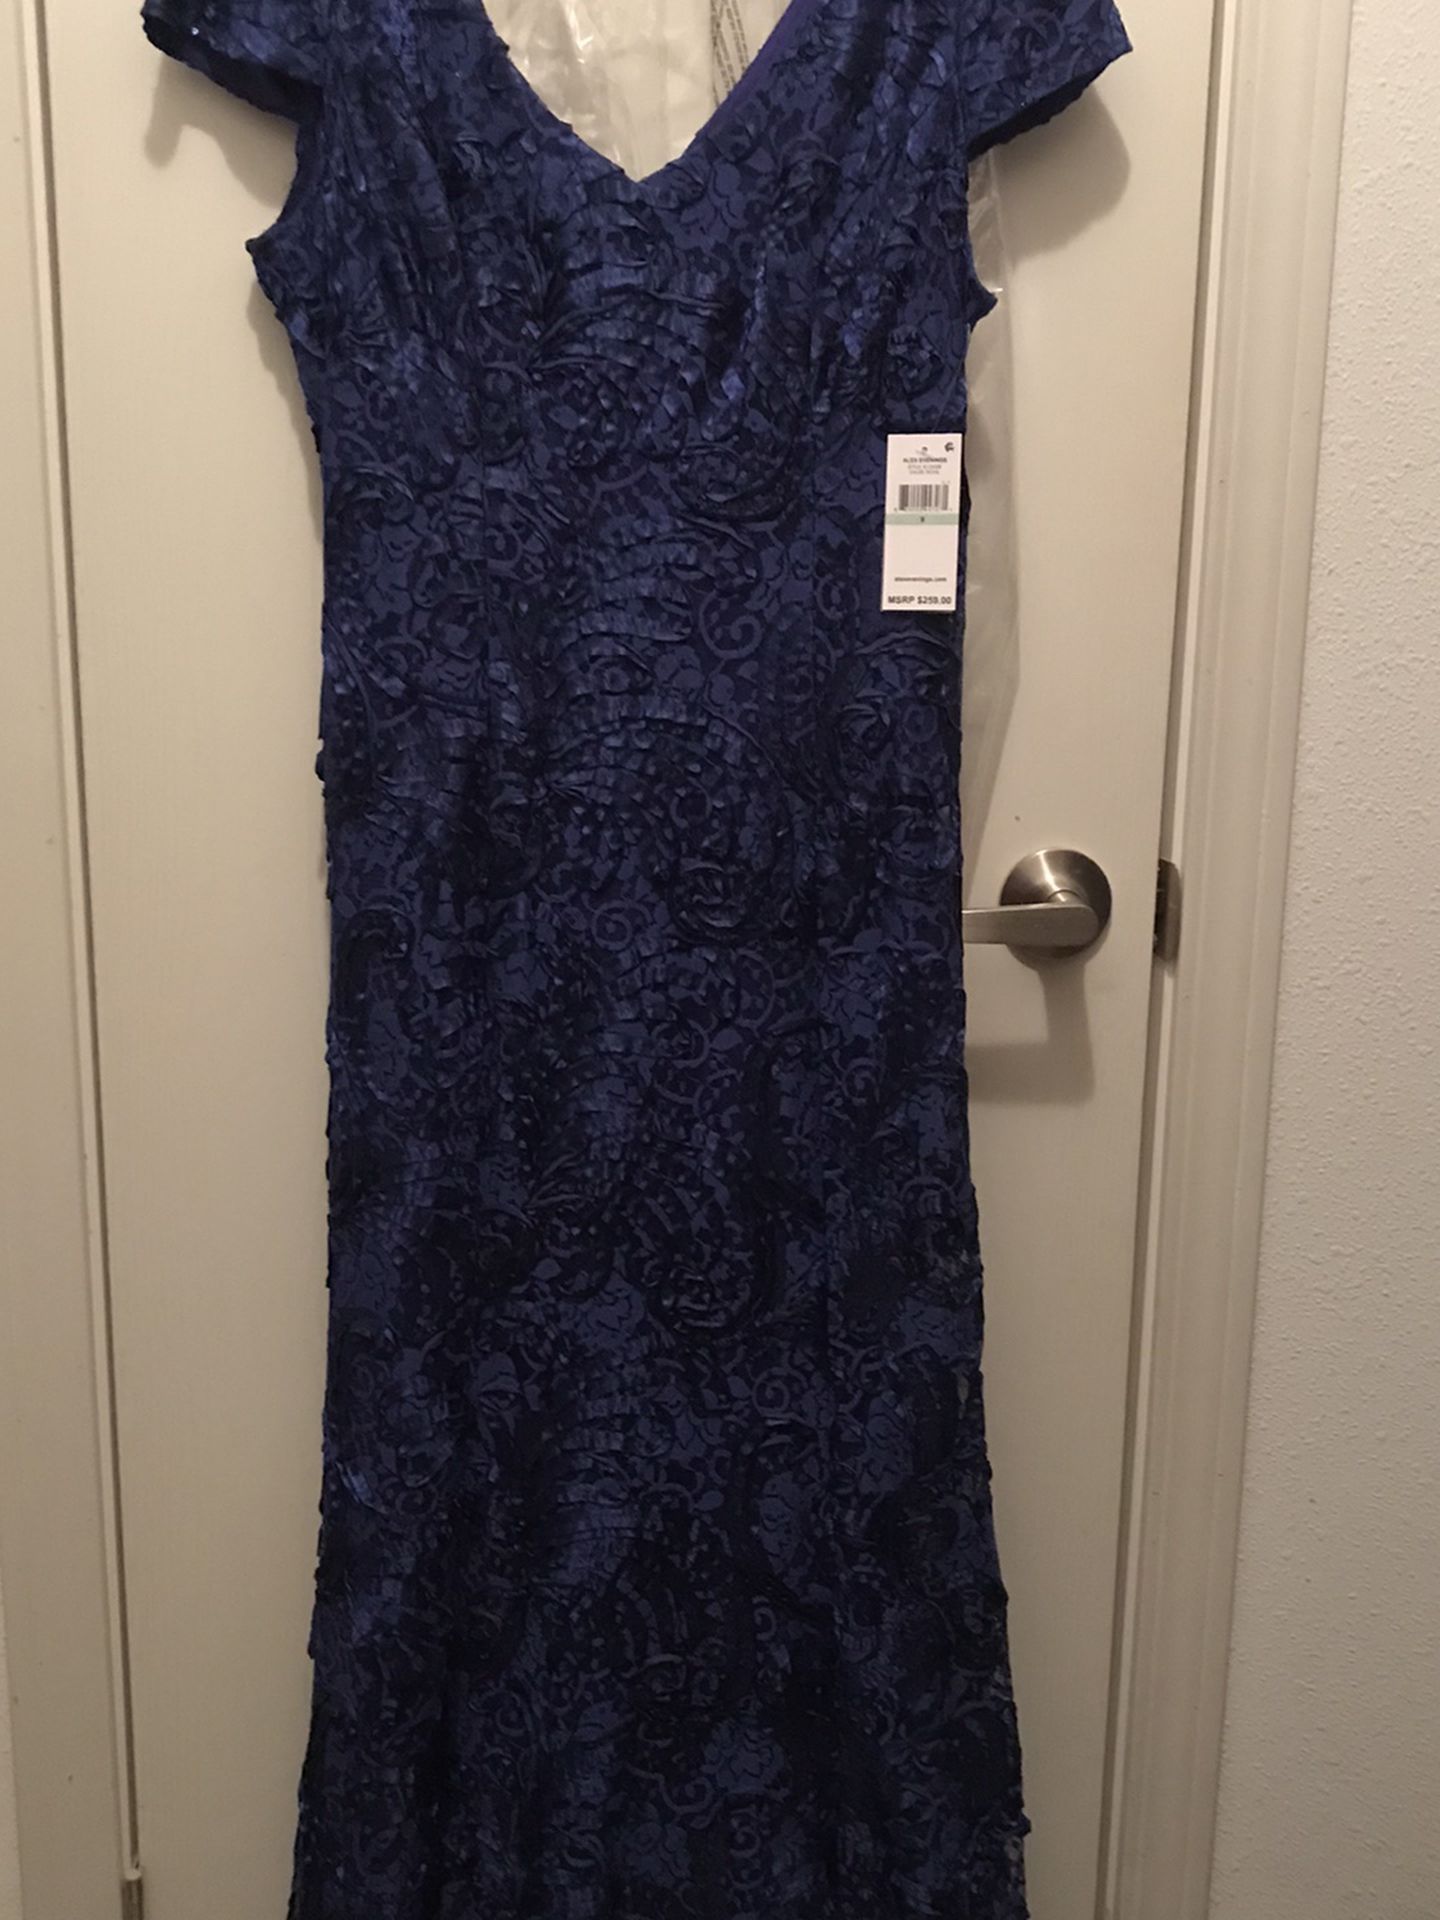 Evening Dress . Brand New With Tags Still On Plastic !